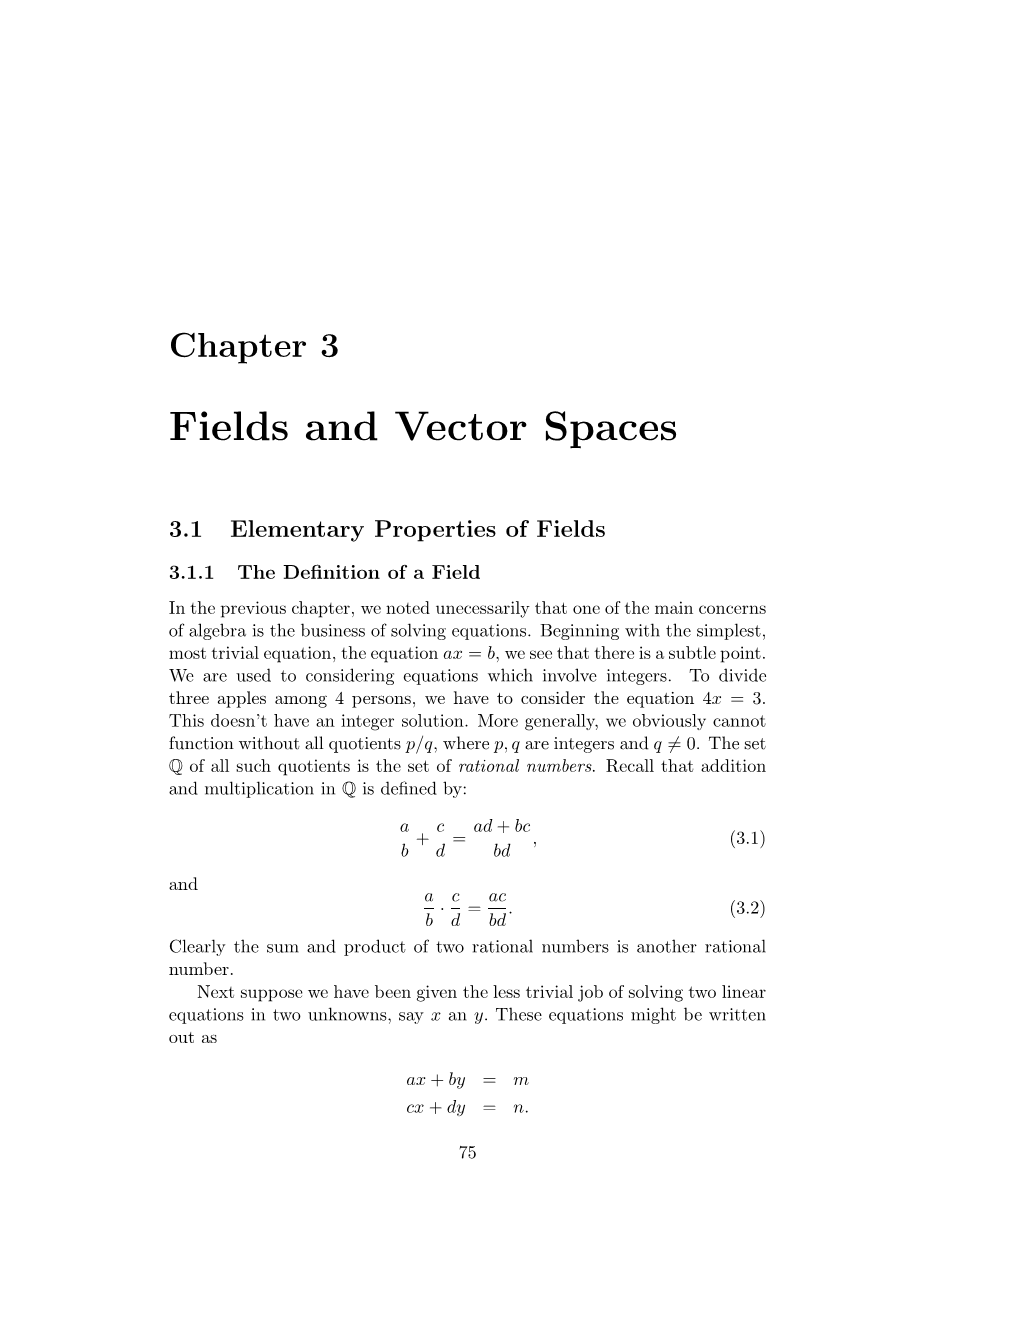 Fields and Vector Spaces